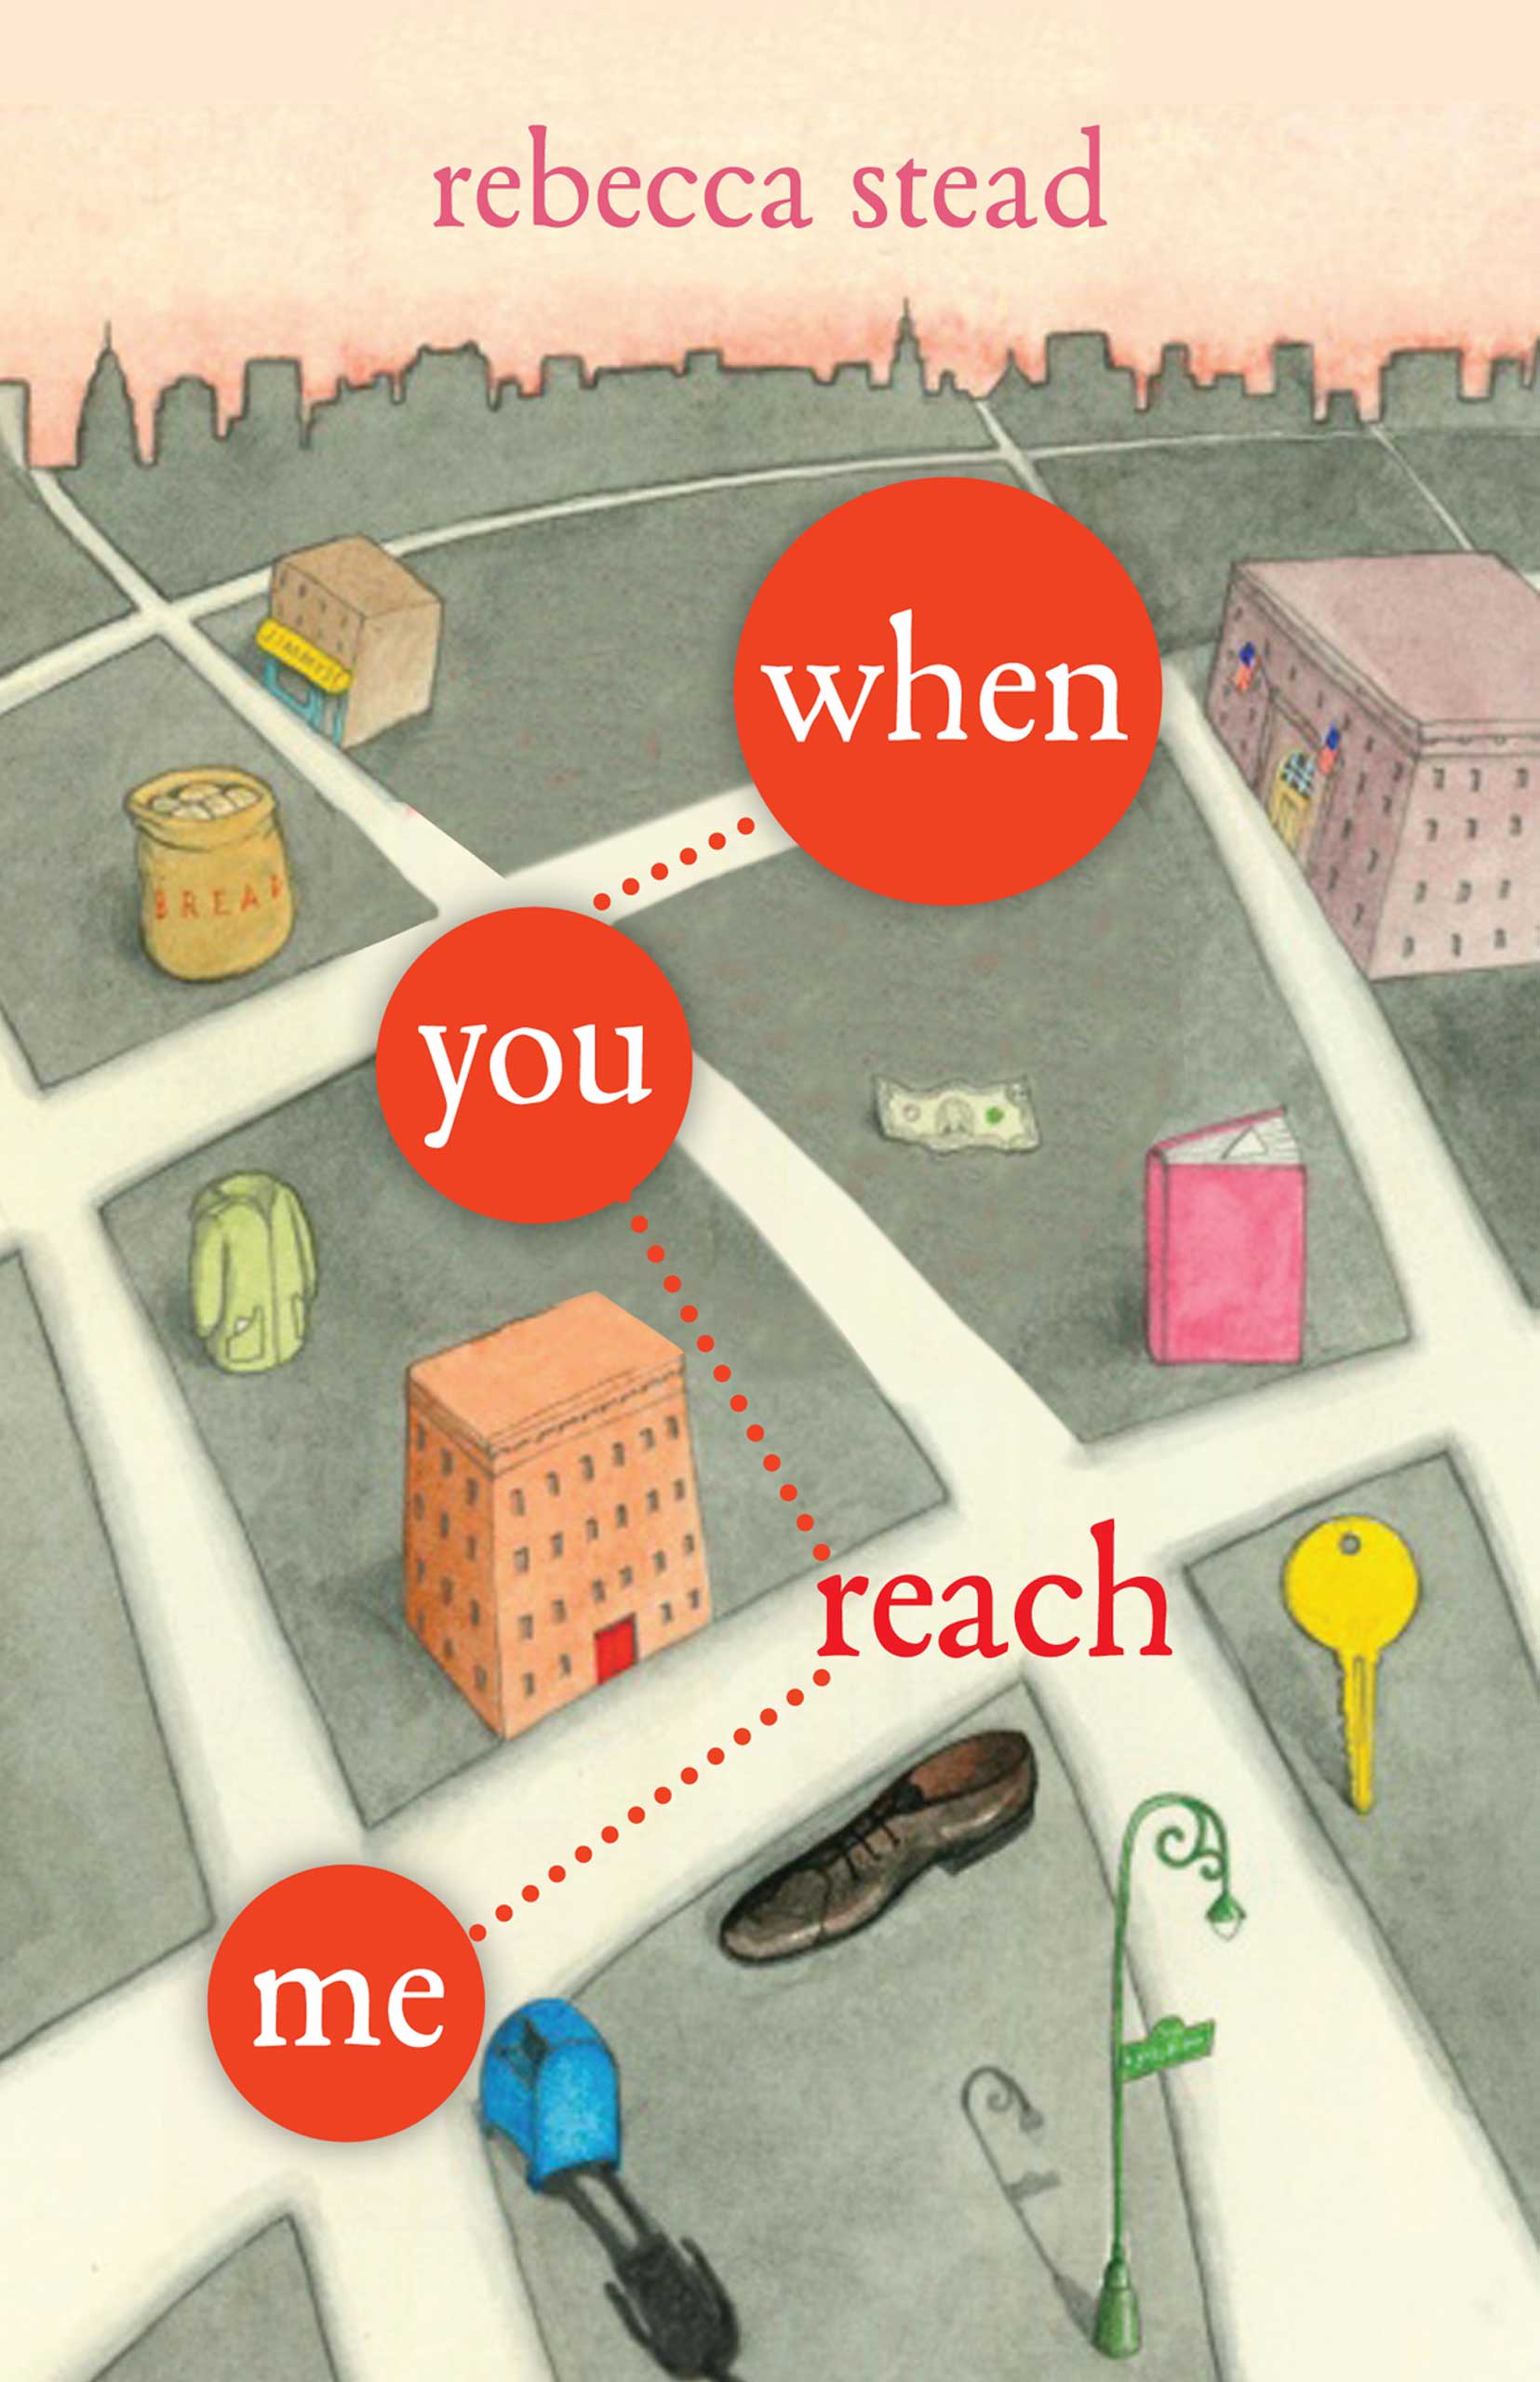 When You Reach Me, by Rebecca Stead.
                              
                              
                              
                              Life in 1970s New York City takes a turn for the bizarre for young Miranda Sinclair.
                              
                              
                              
                              Buy now: When You Reach Me